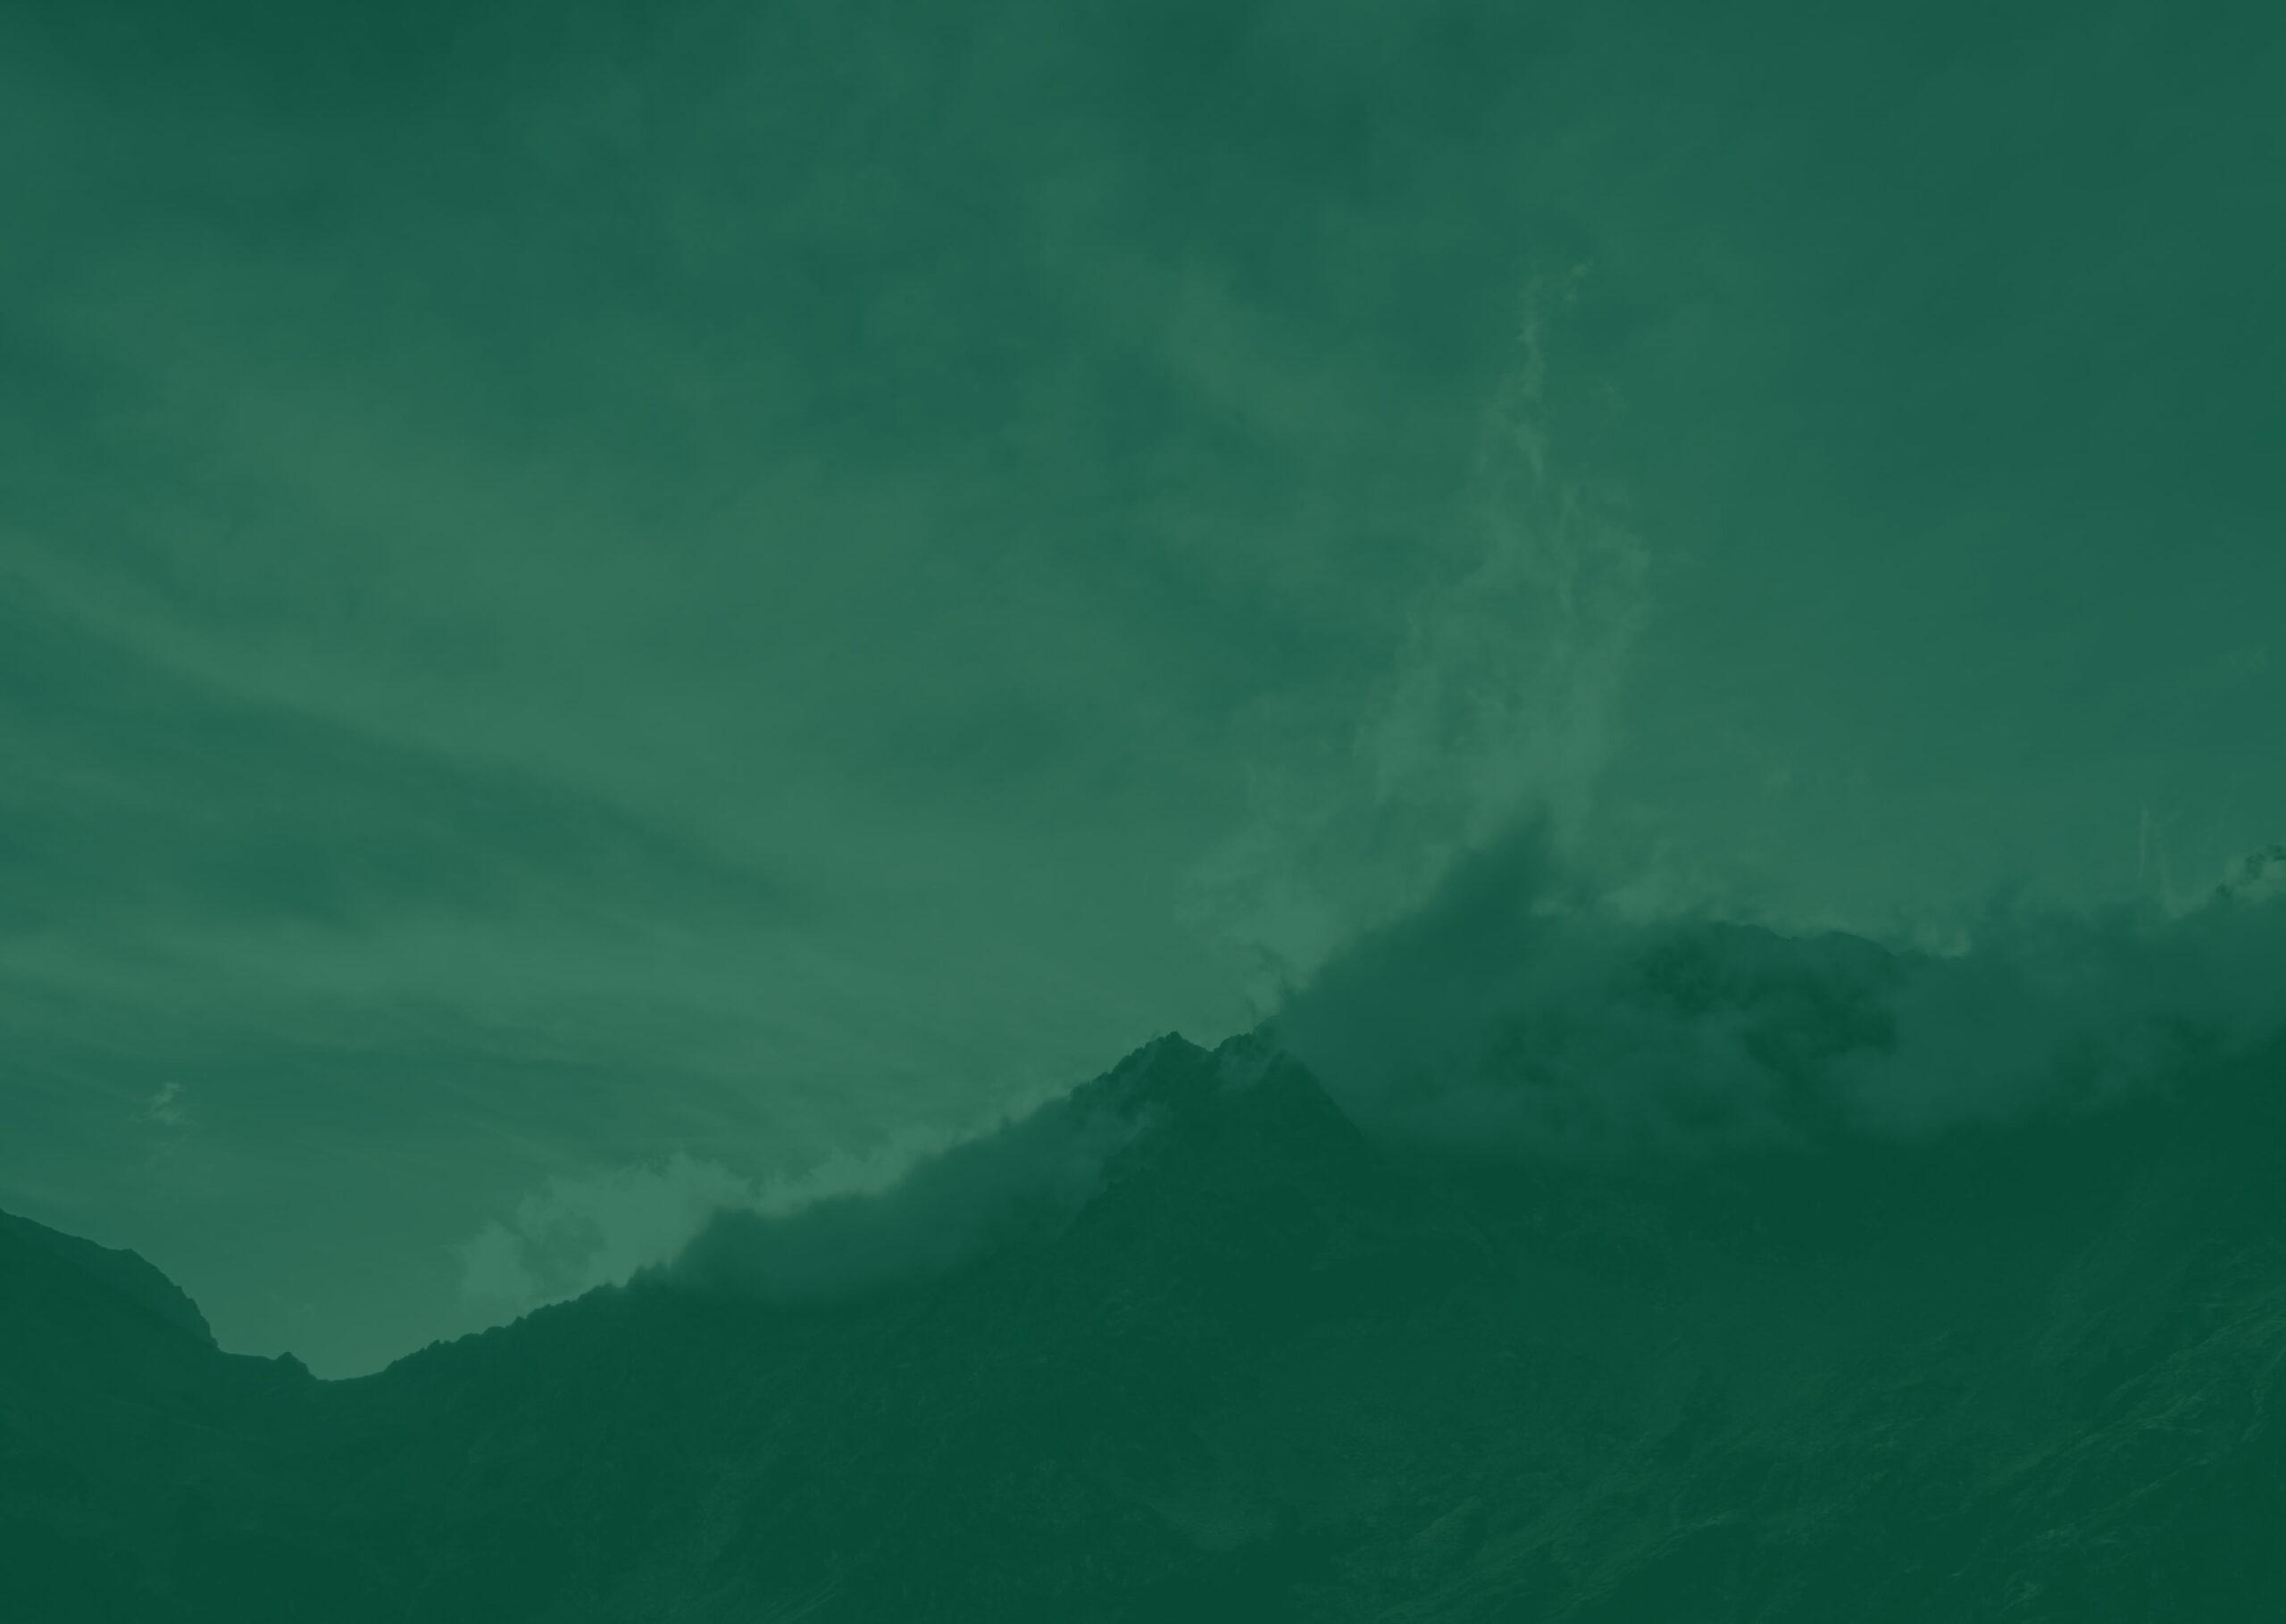 A mountain with the sky in the background with a green filter over it